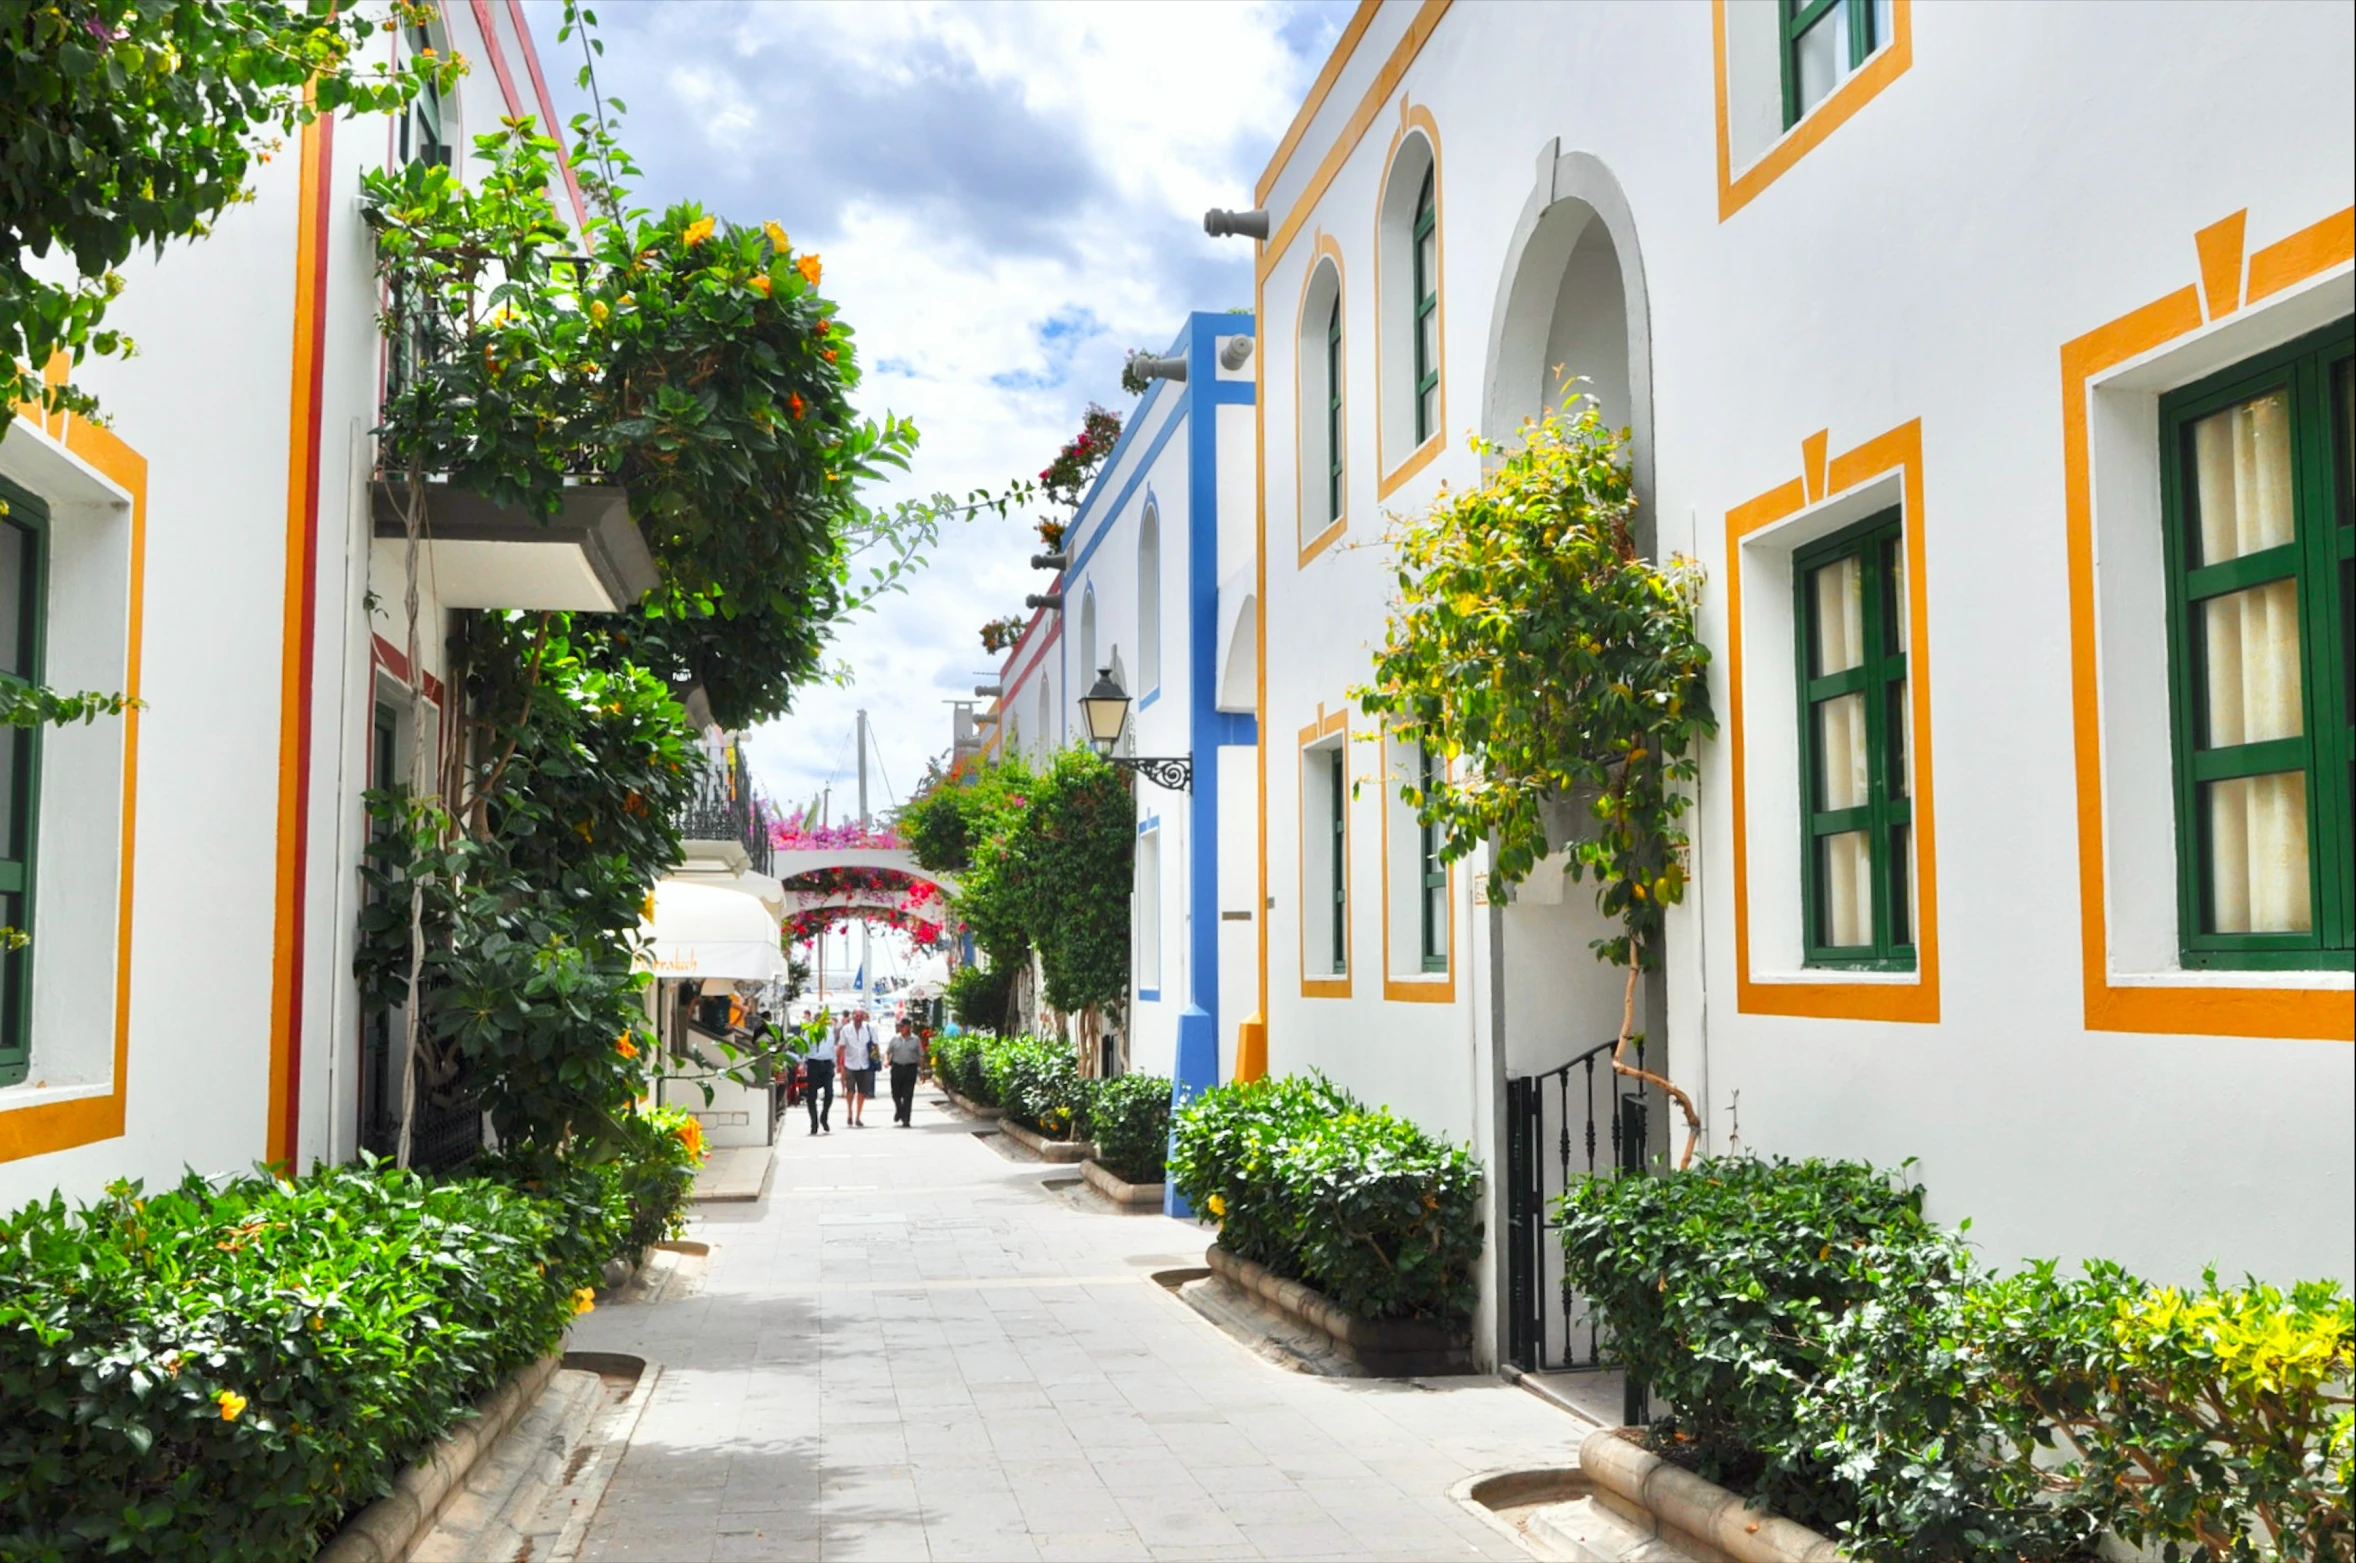 the walkway next to some colorful houses in a village